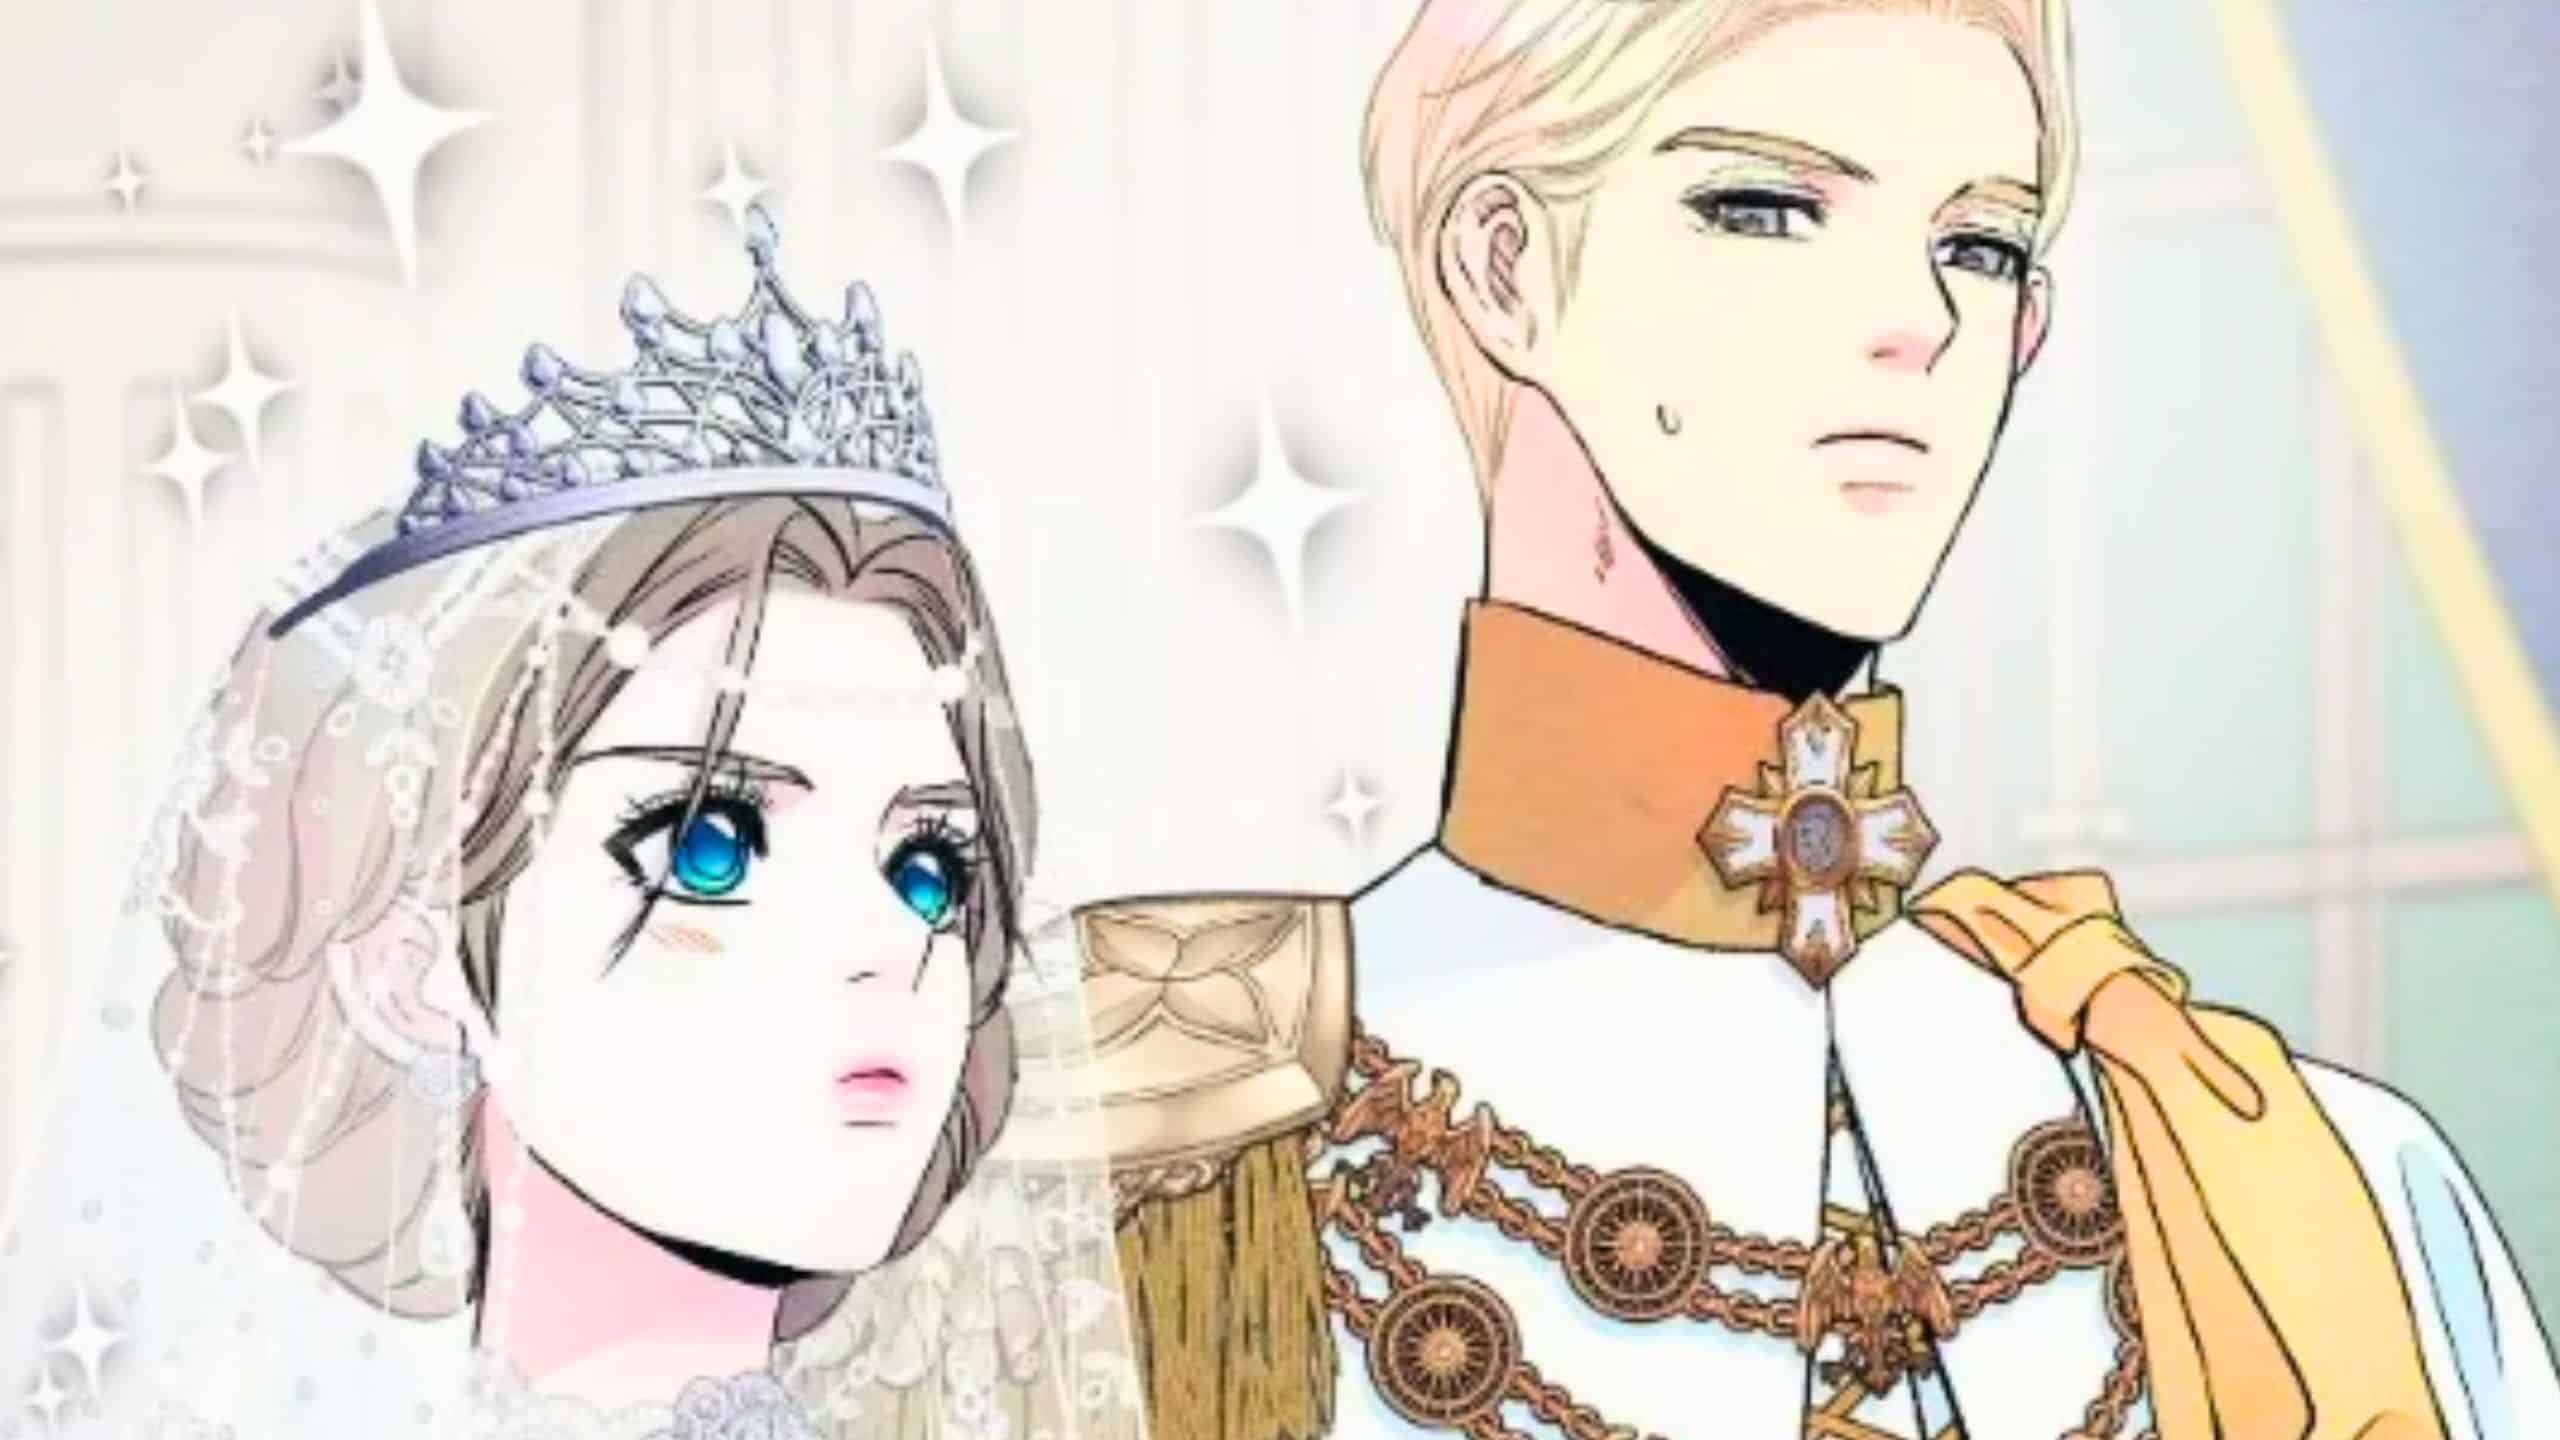 The Problematic Prince Chapter 50 Expectations